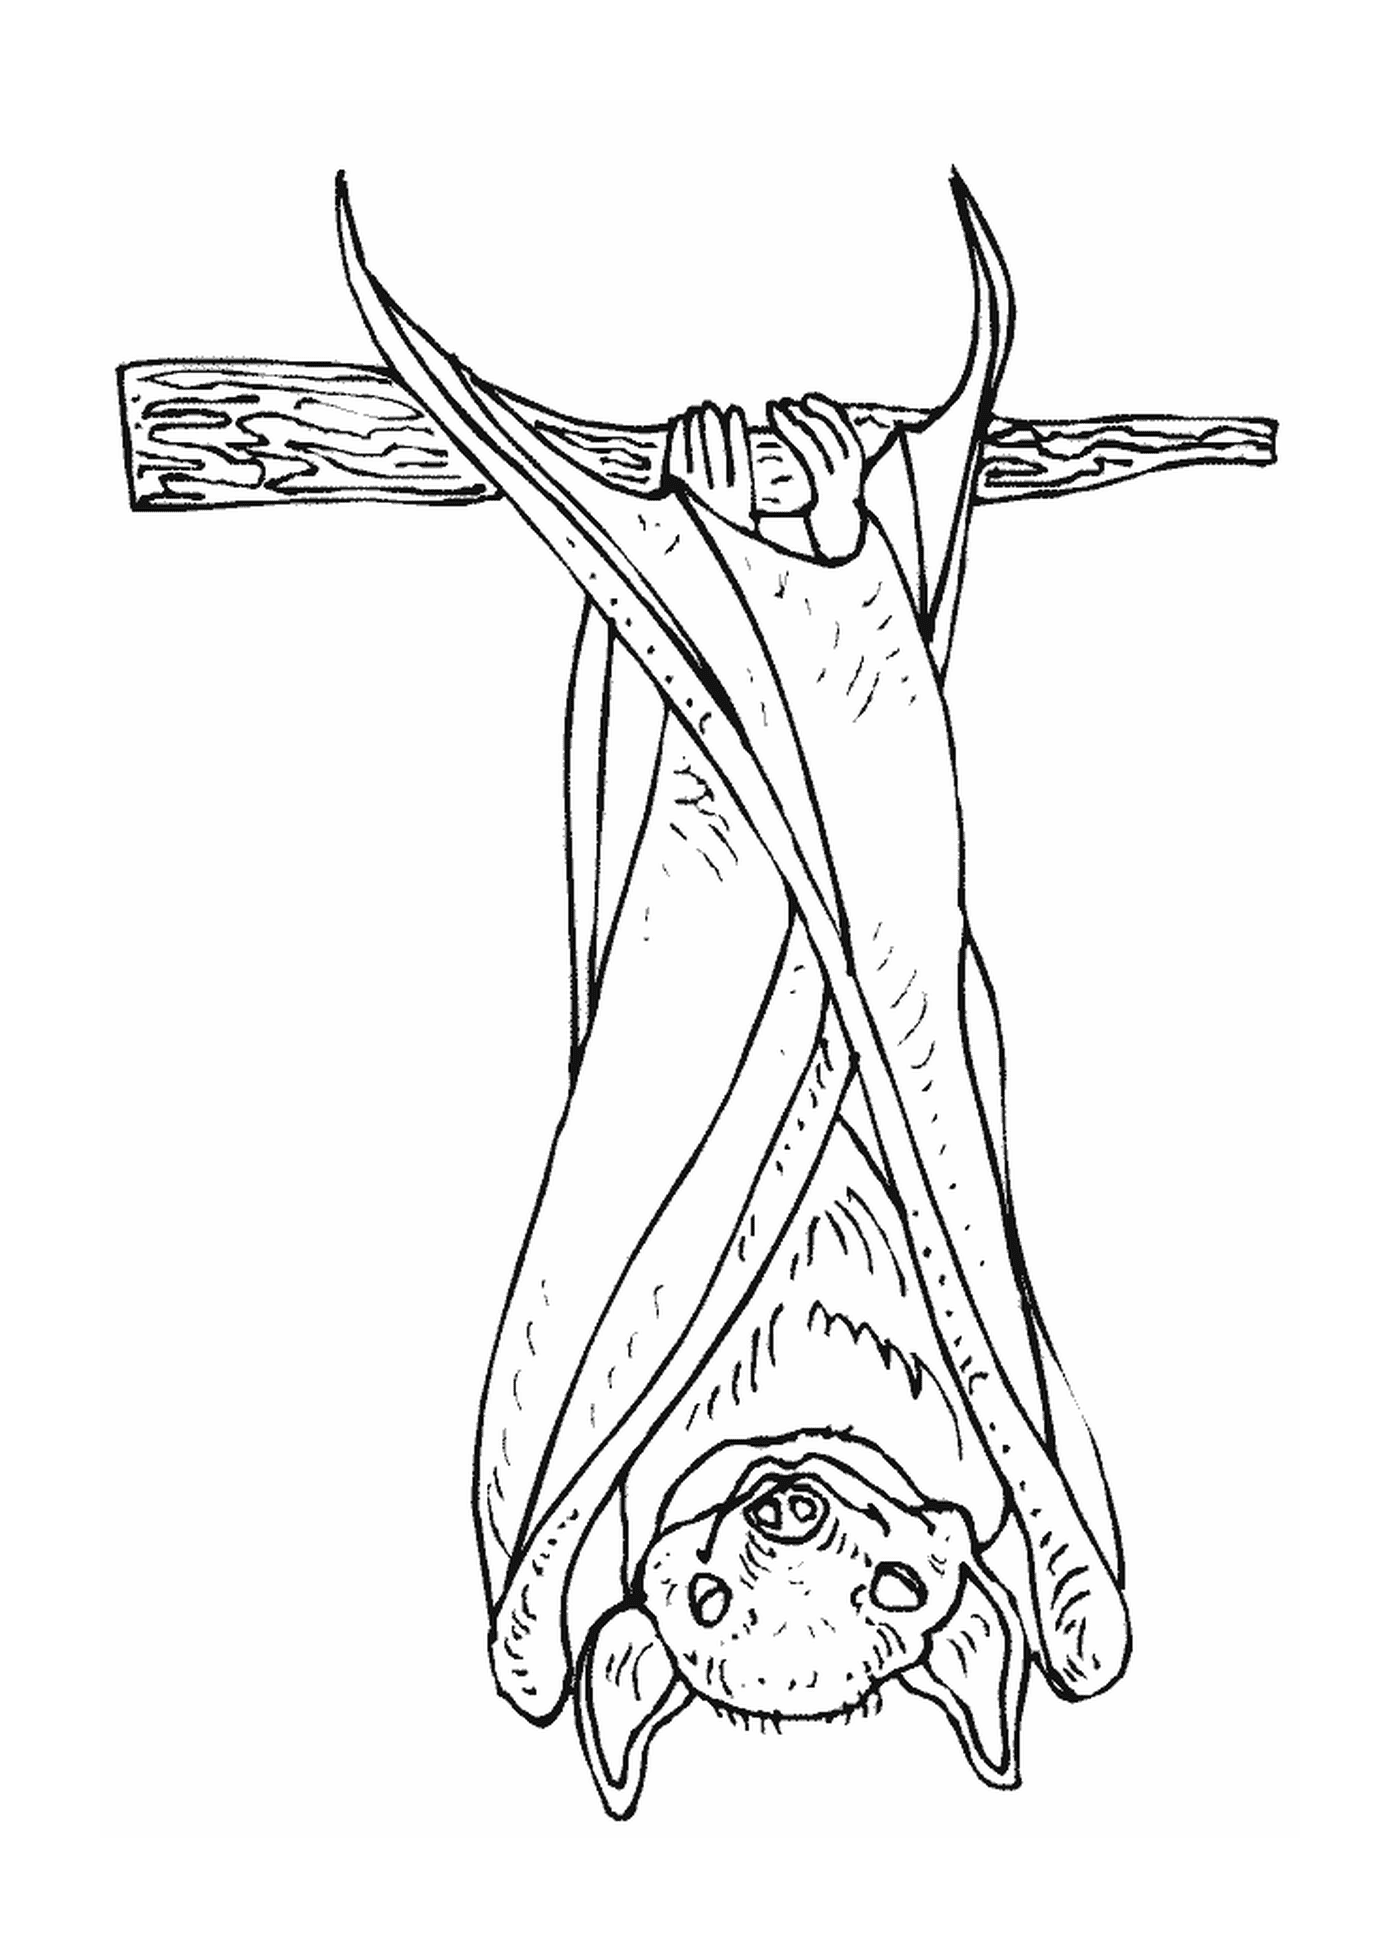  person hanging upside down on a cross 